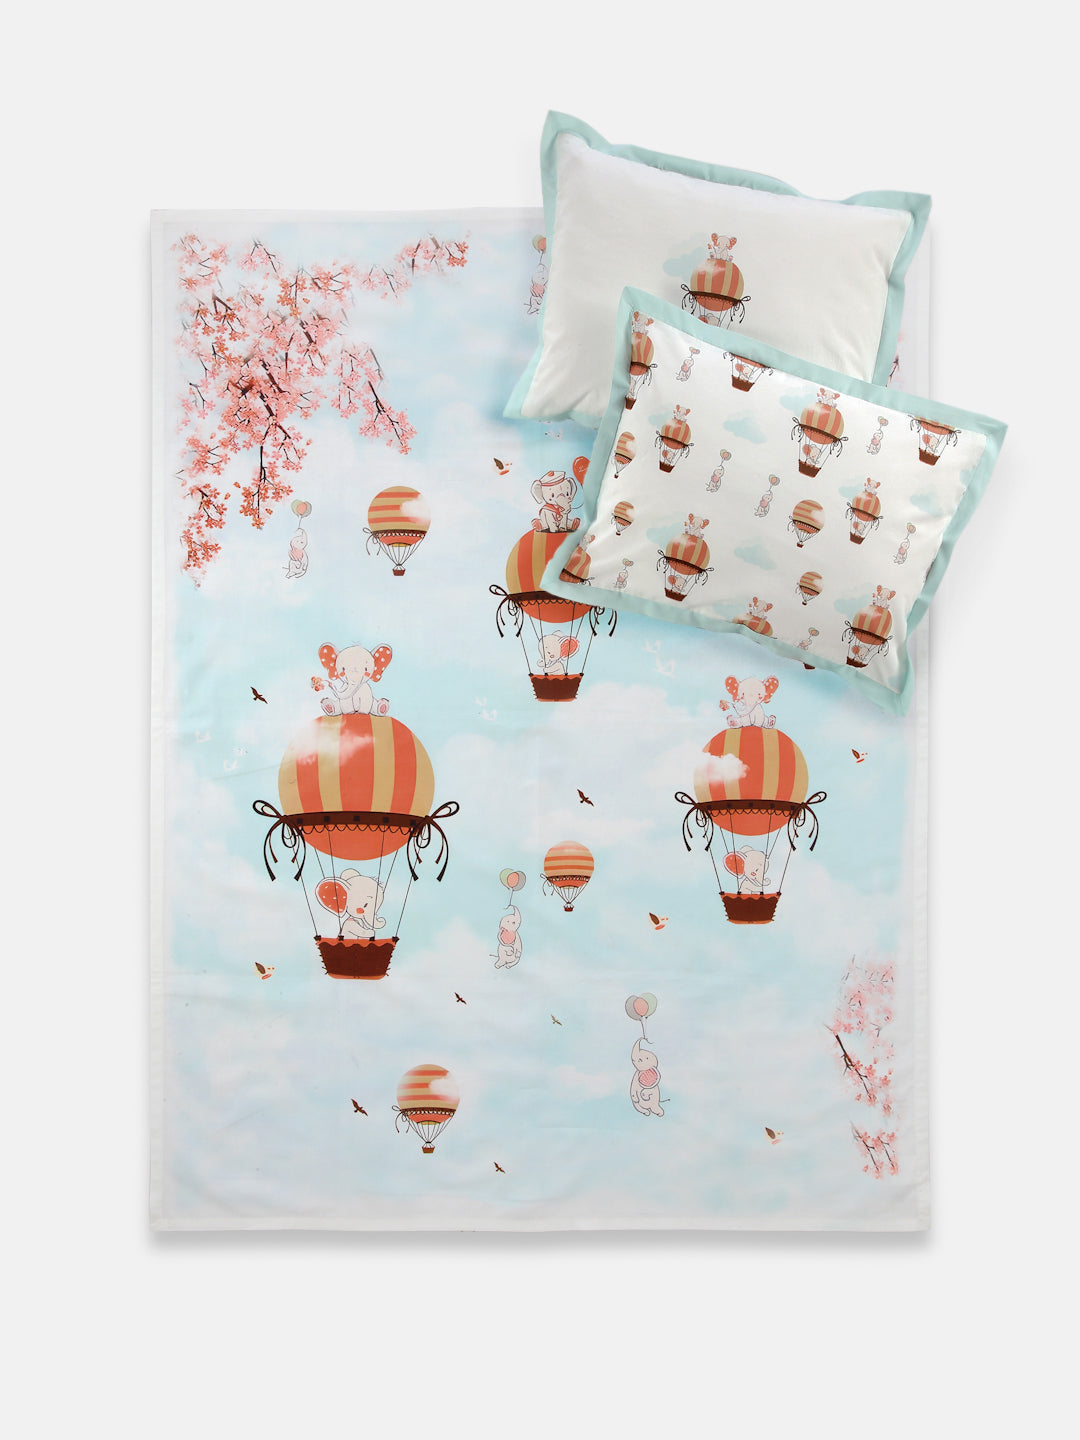 ELE ON THE BALLOON BED SHEET SET - WITH 2 PILLOW COVER